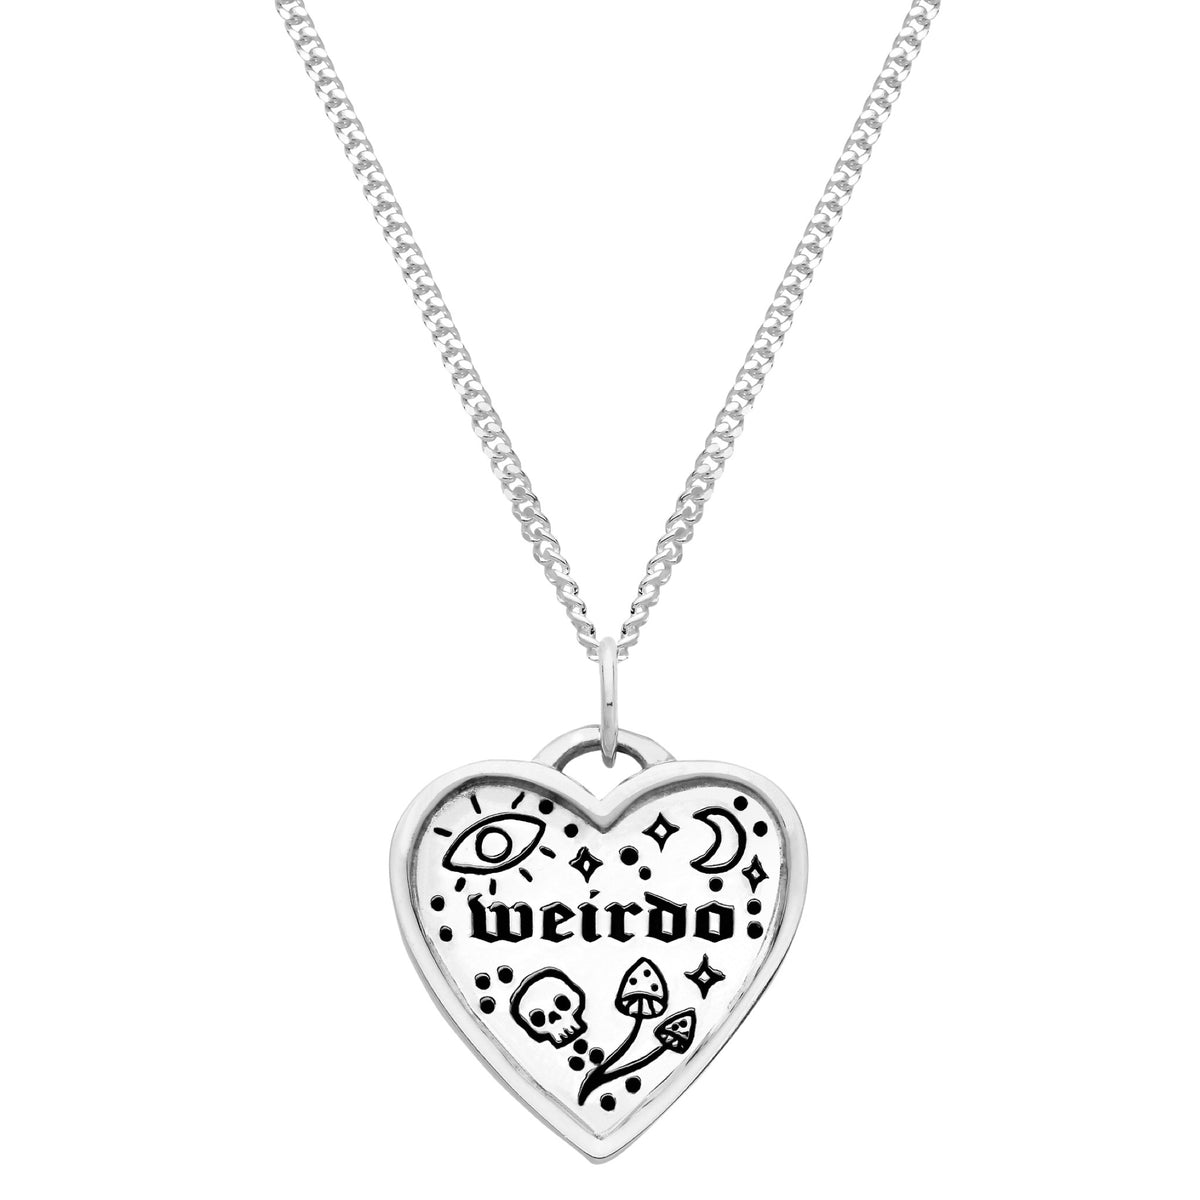 YOU ARE WEIRD - Sterling Silver Necklace